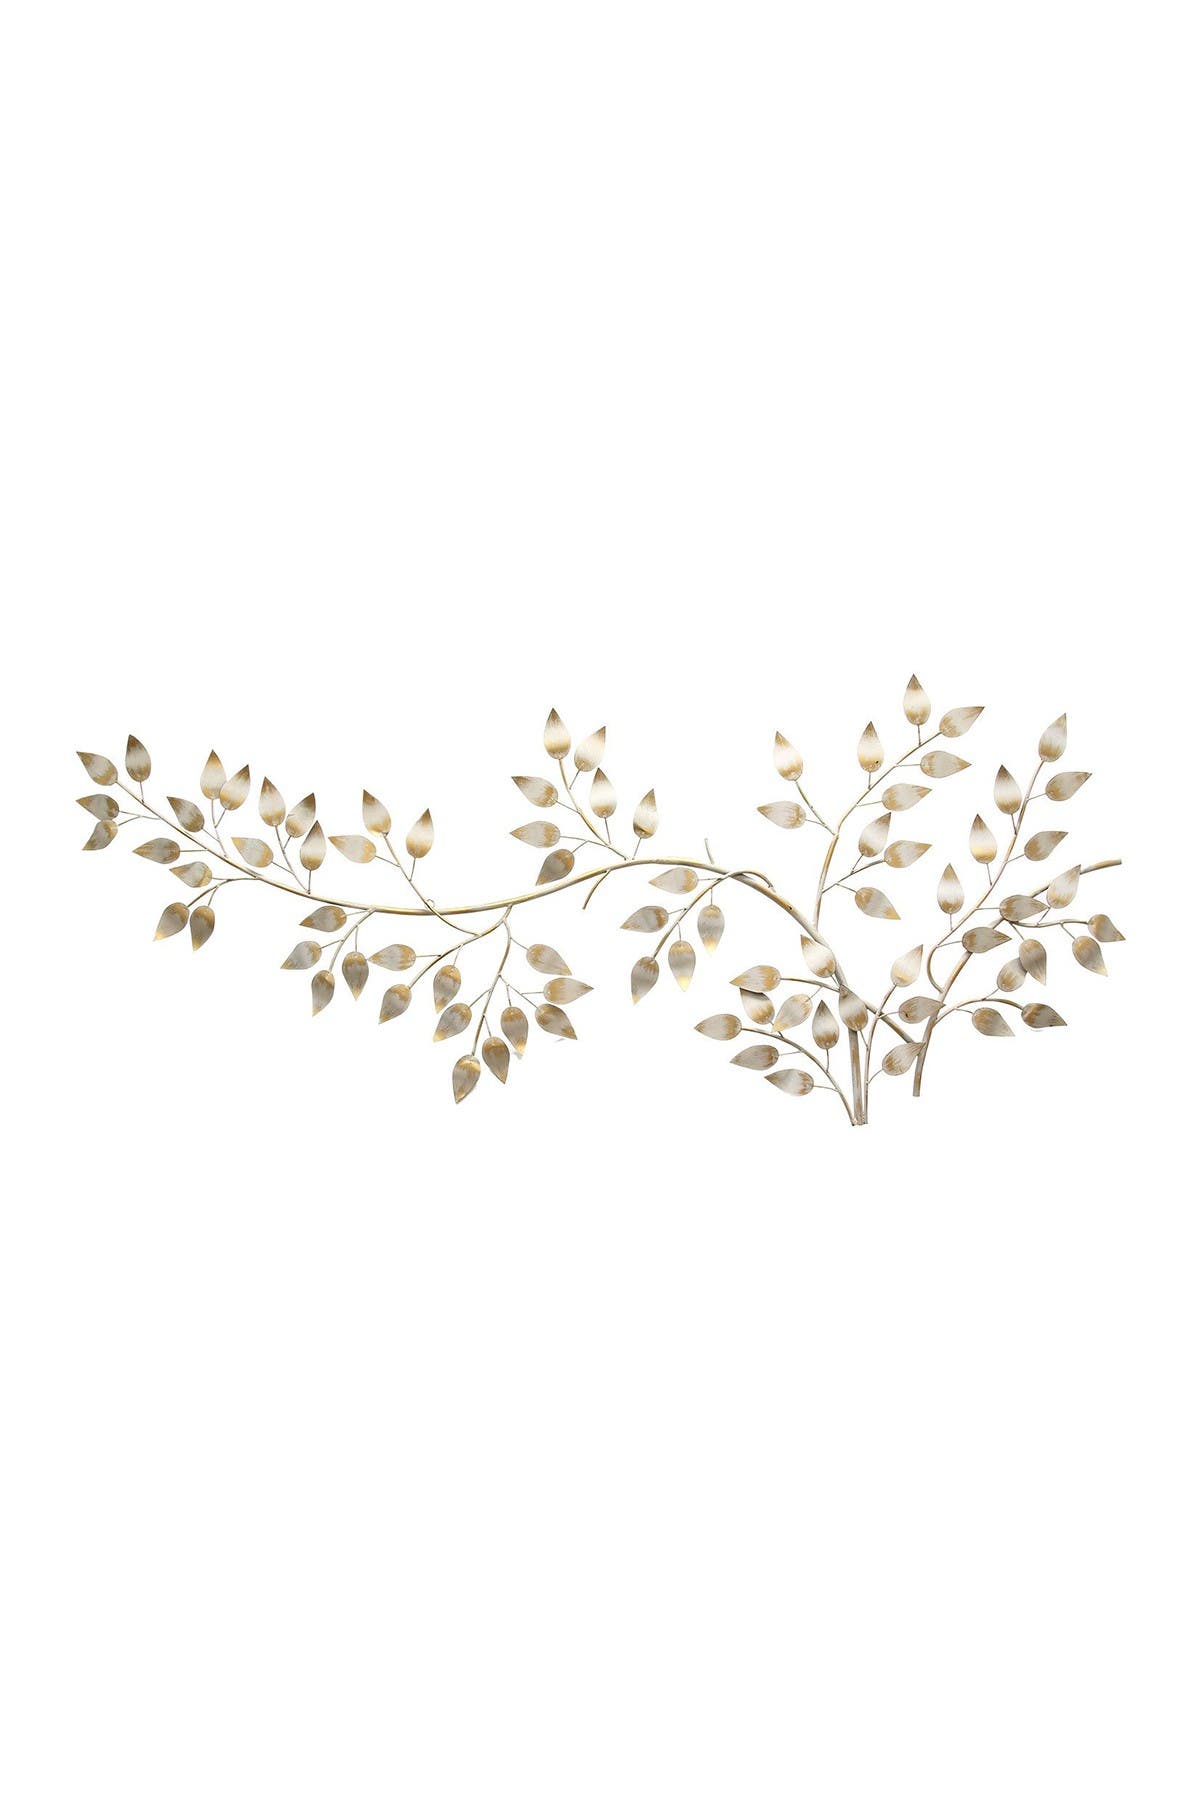 Stratton Home Metallic Gold/white Flowing Leaves Wall Decor